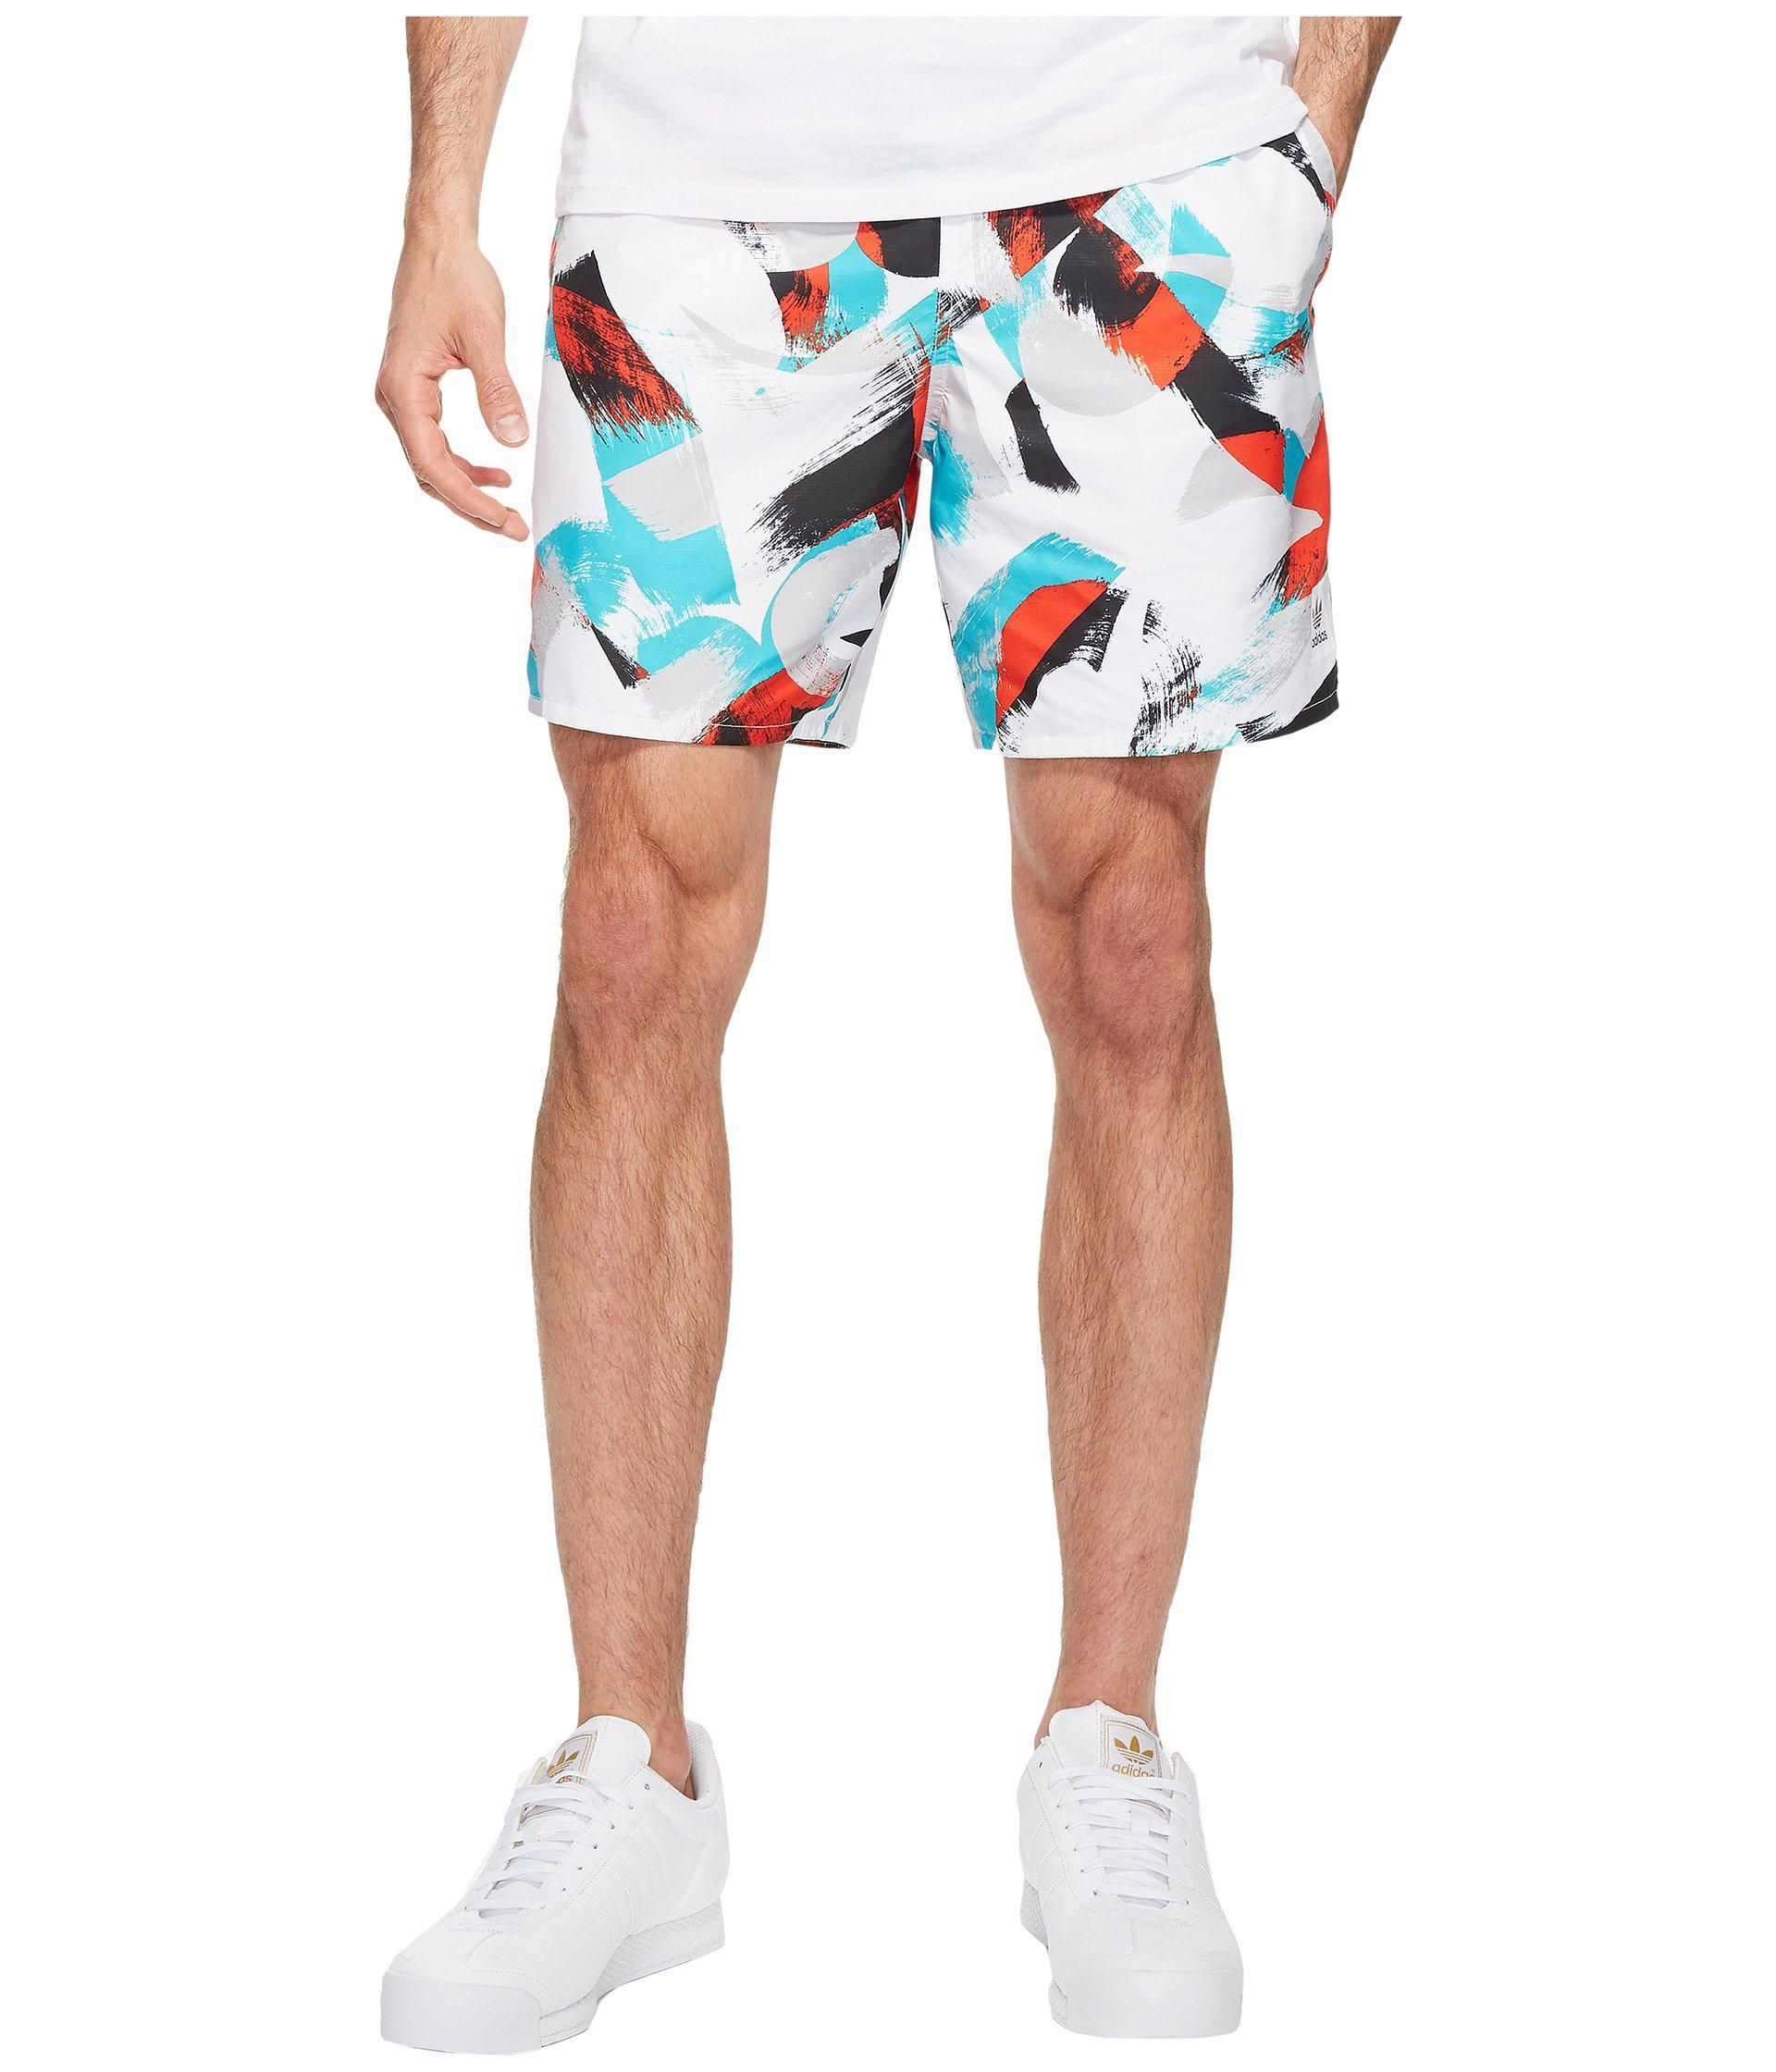 adidas Originals Synthetic Courtside Shorts in Blue for Men - Lyst